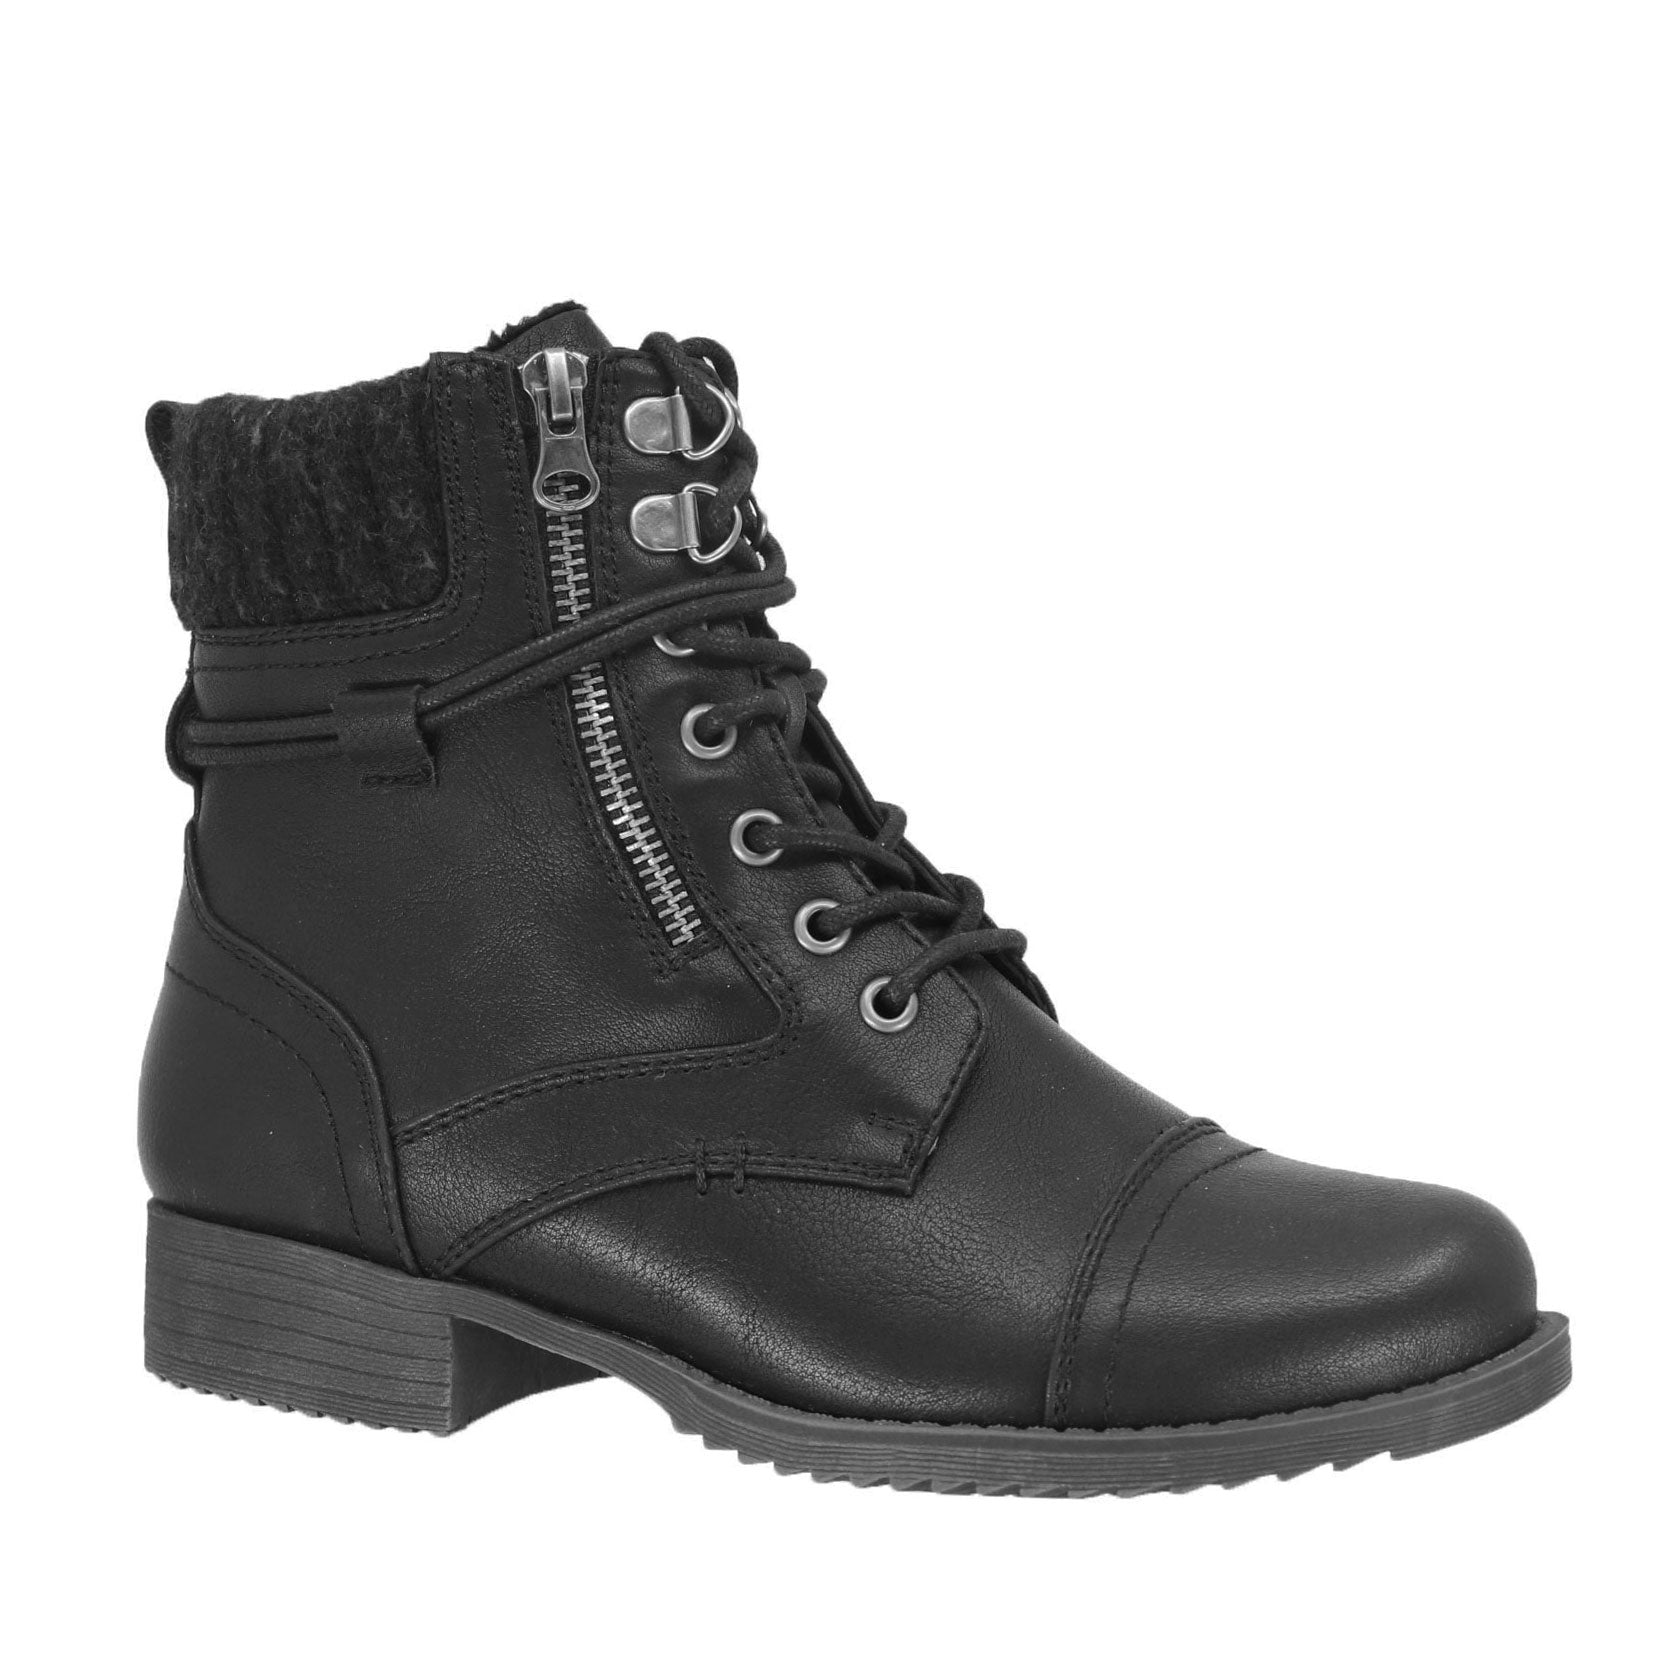 All Boots | TAXI SHOES – Taxi Shoes Canada